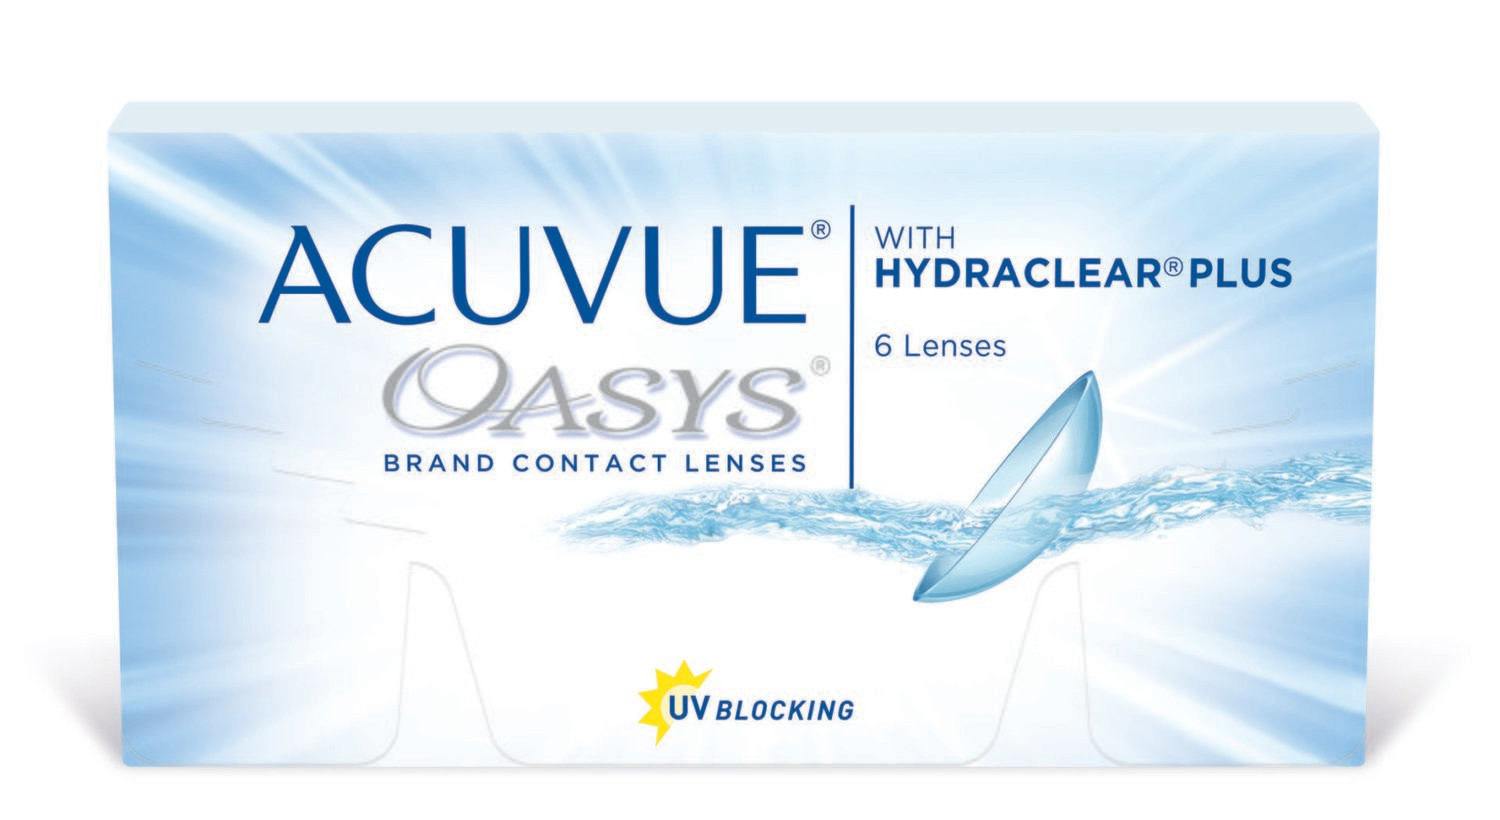 Acuvue Oasys (12 pack) by Johnson & Johnson